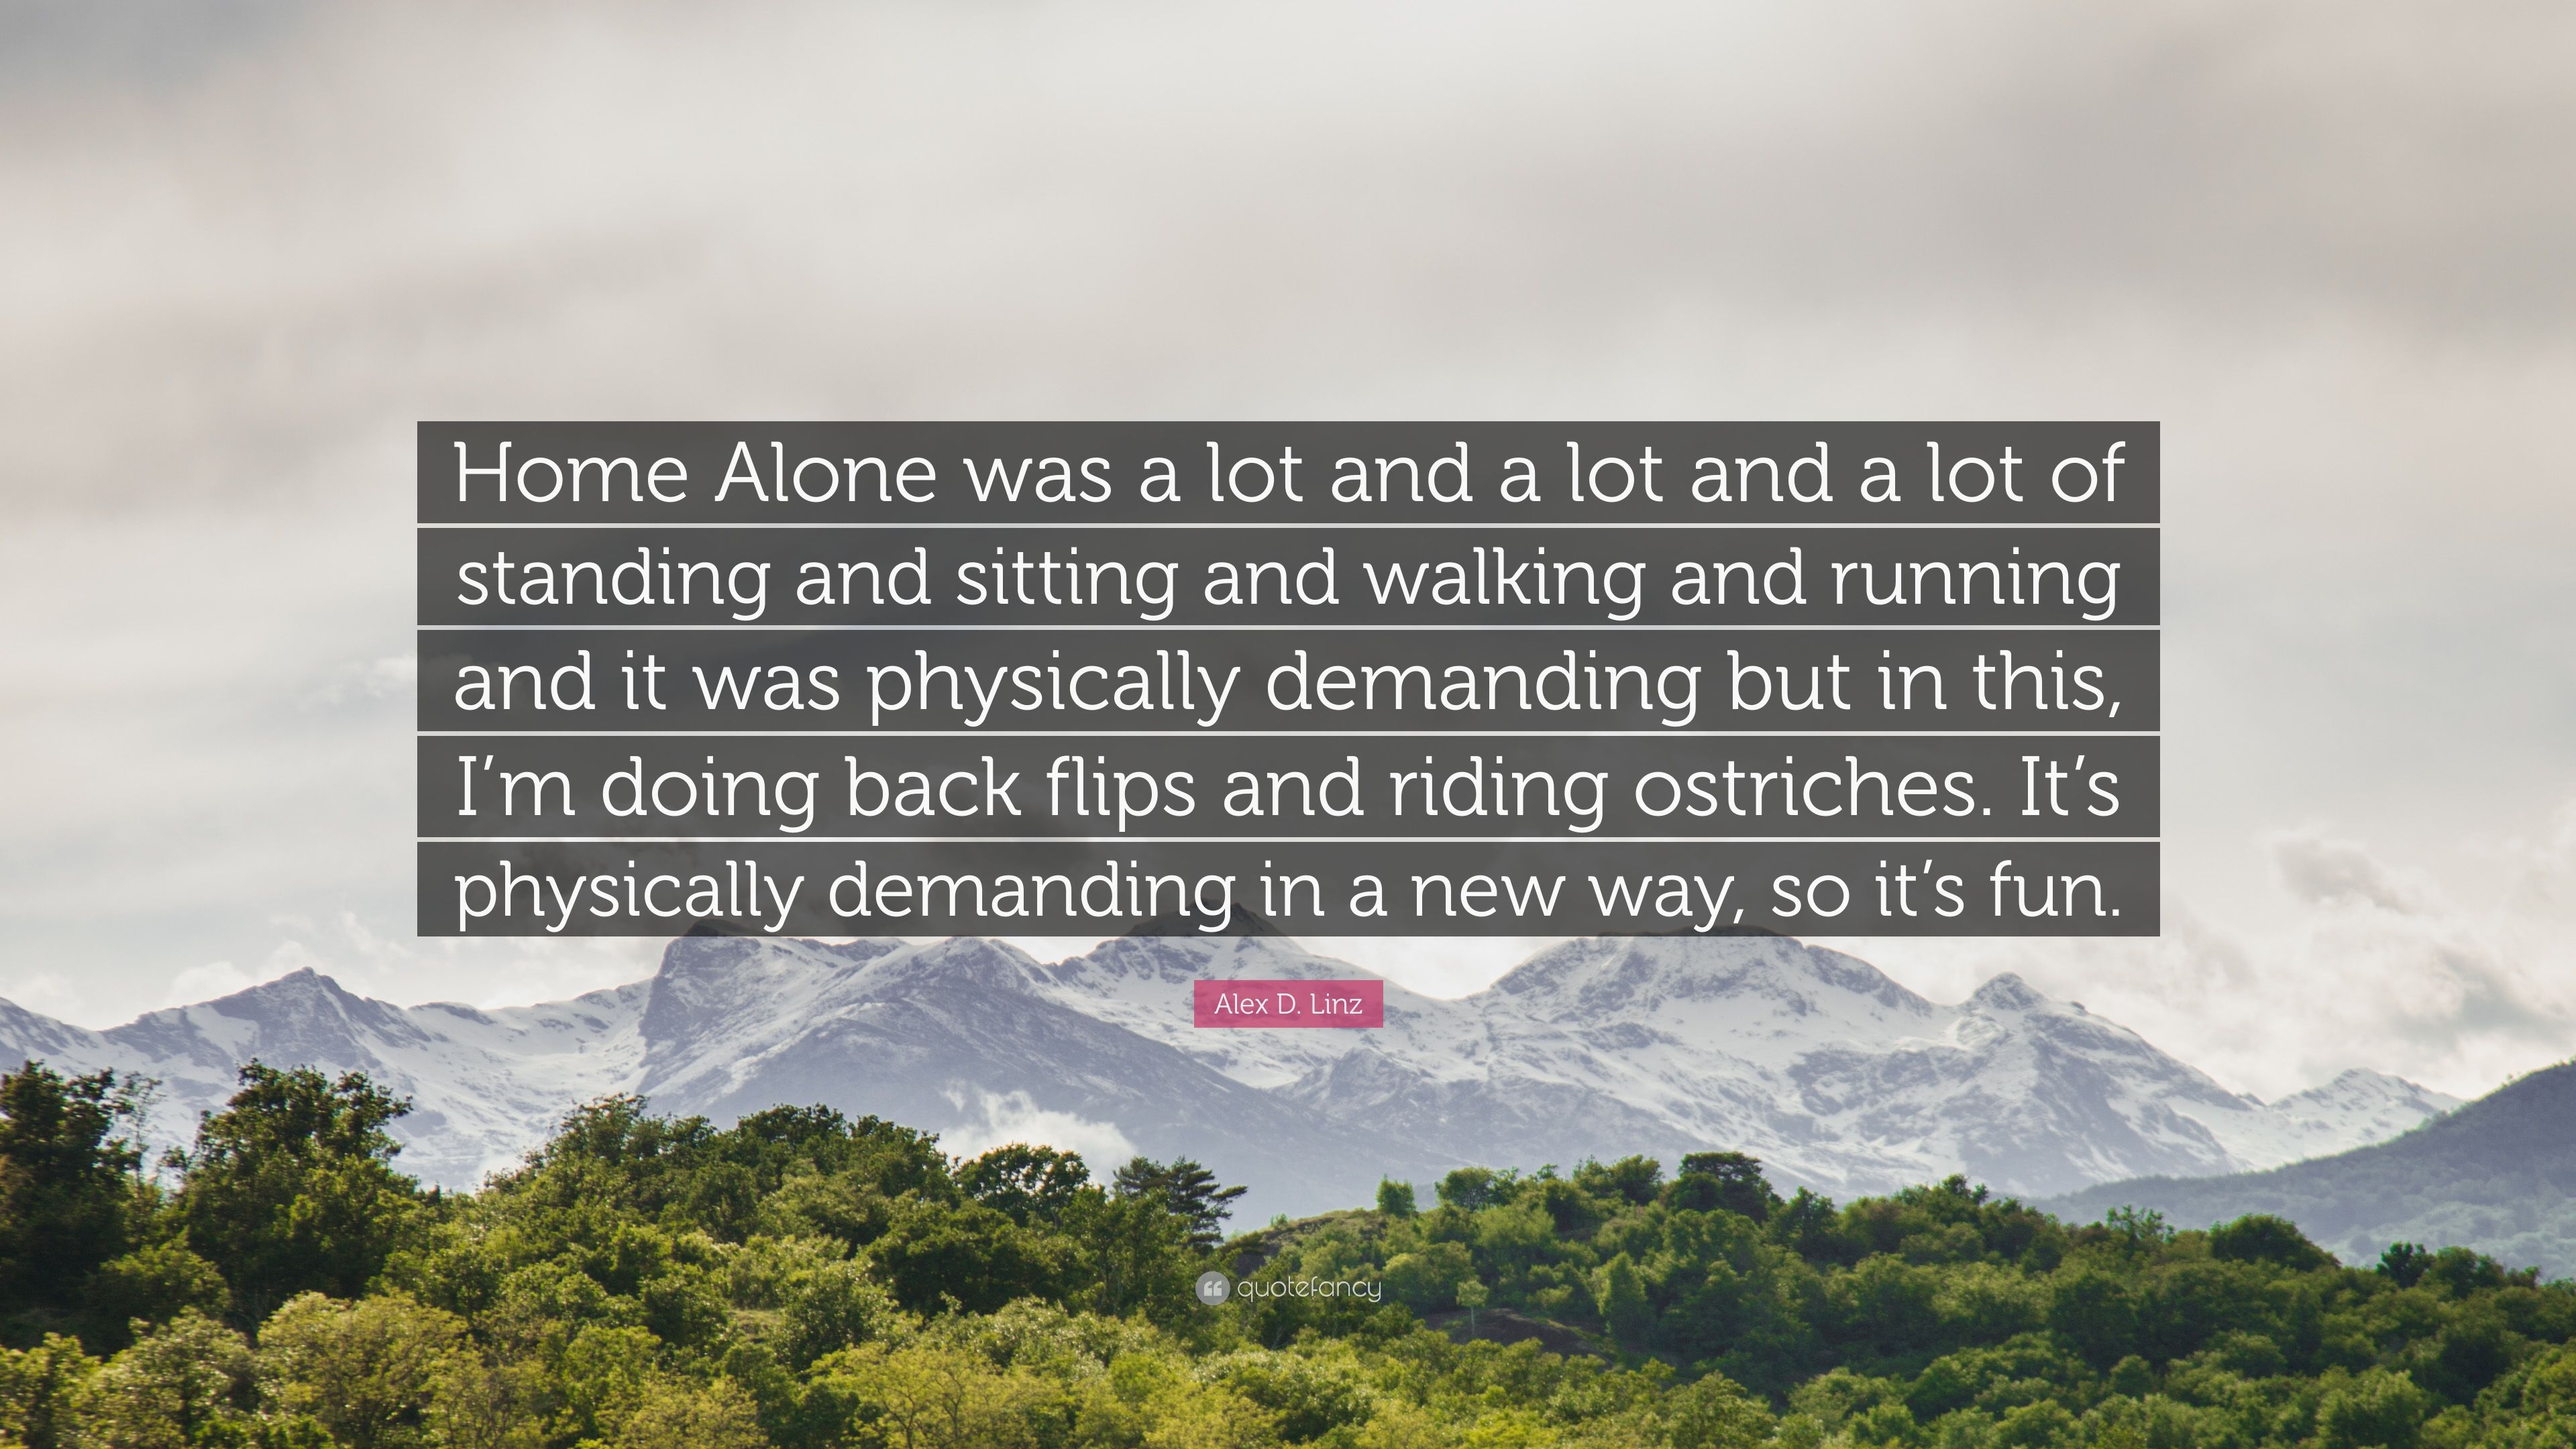 Alex D. Linz Quote: “Home Alone was a lot and a lot and a lot